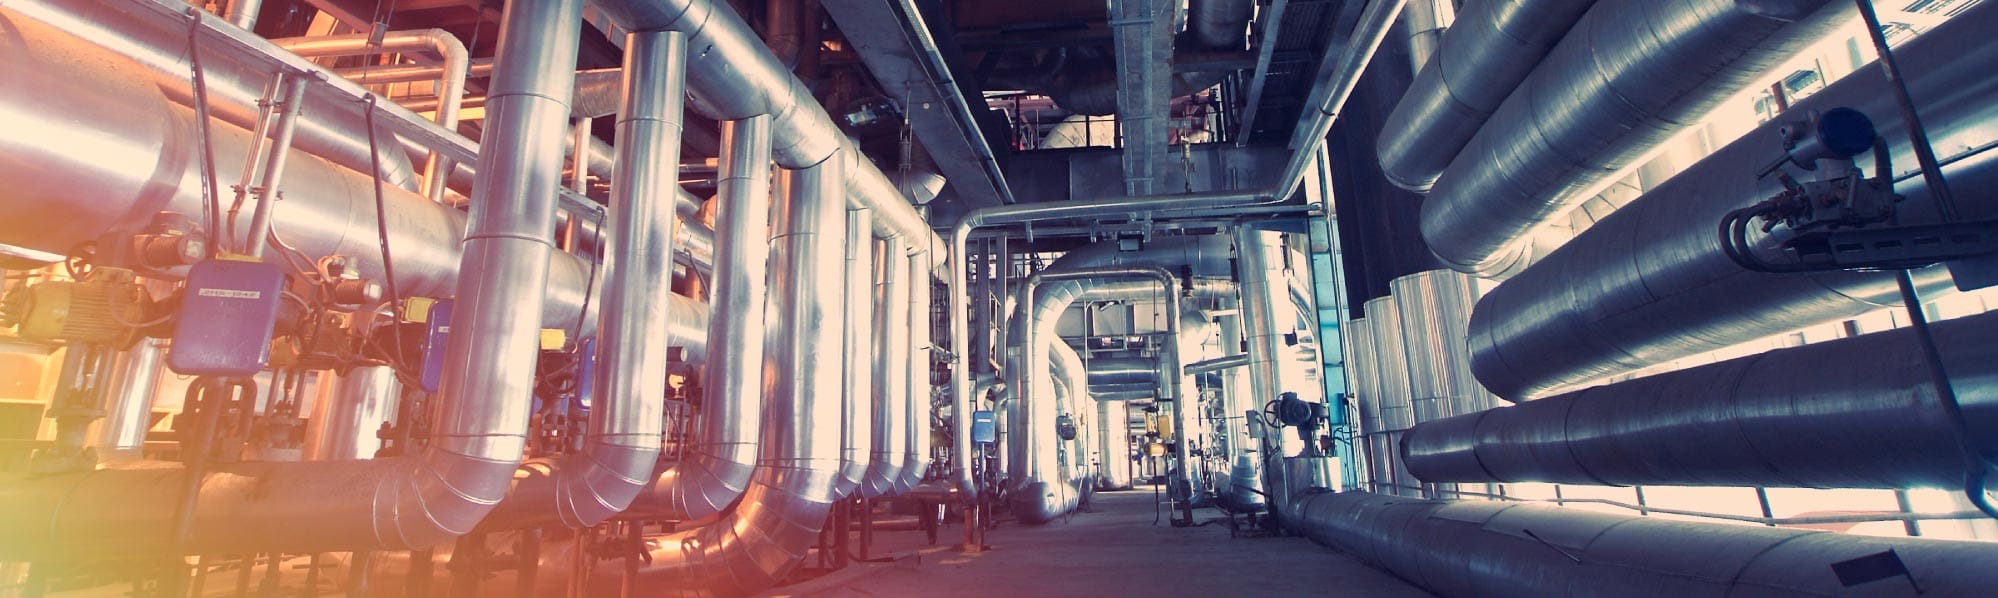 A picture of large shiny steel pipework in a factory